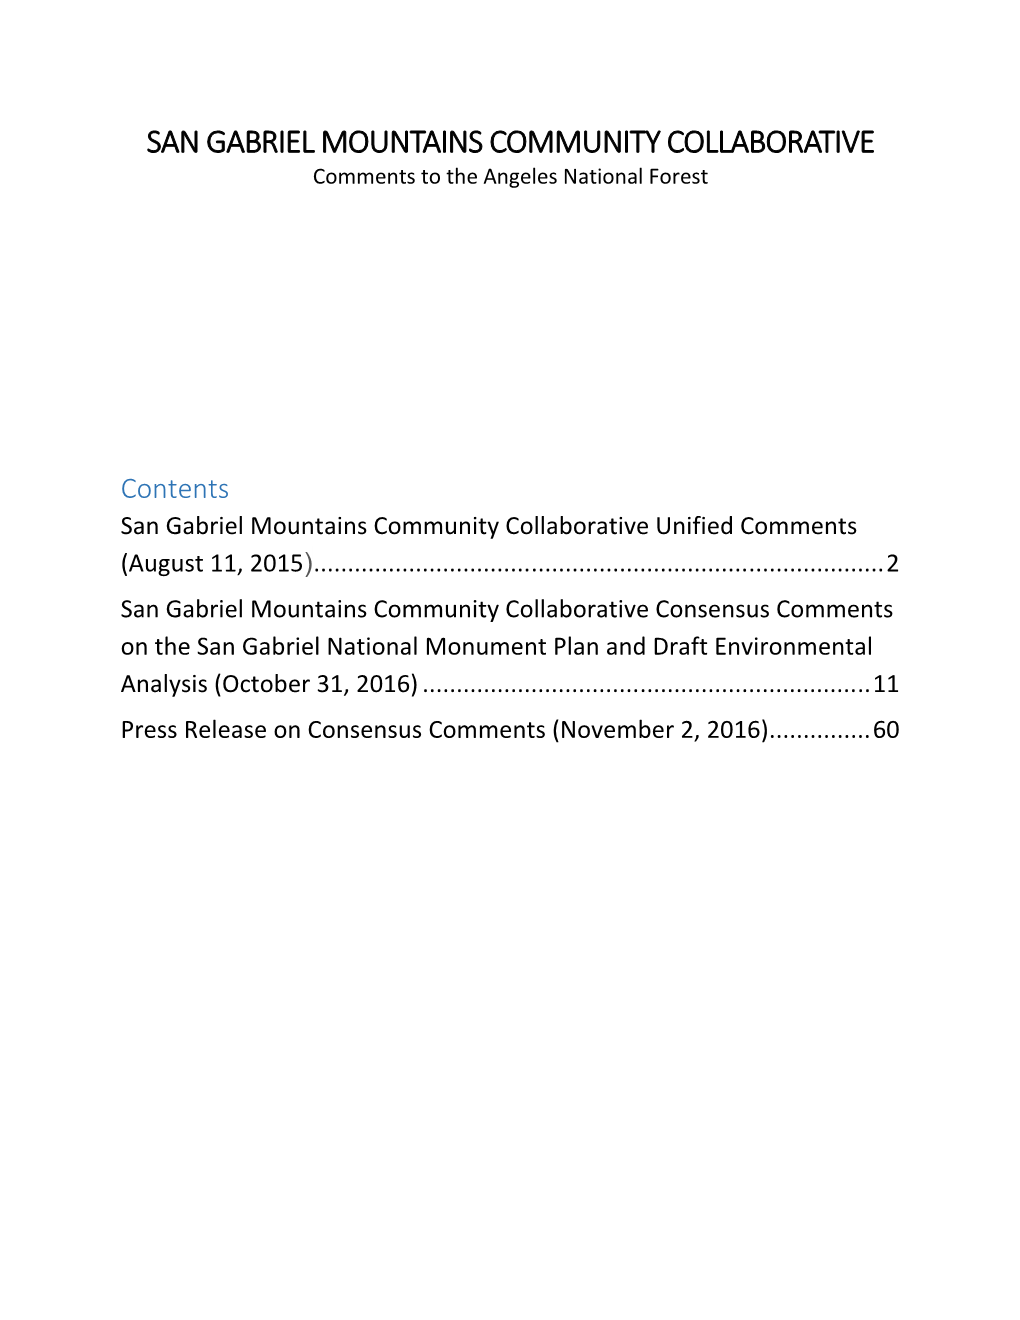 Consensus Comments on the San Gabriel National Monument Plan and Draft Environmental Analysis (October 31, 2016)